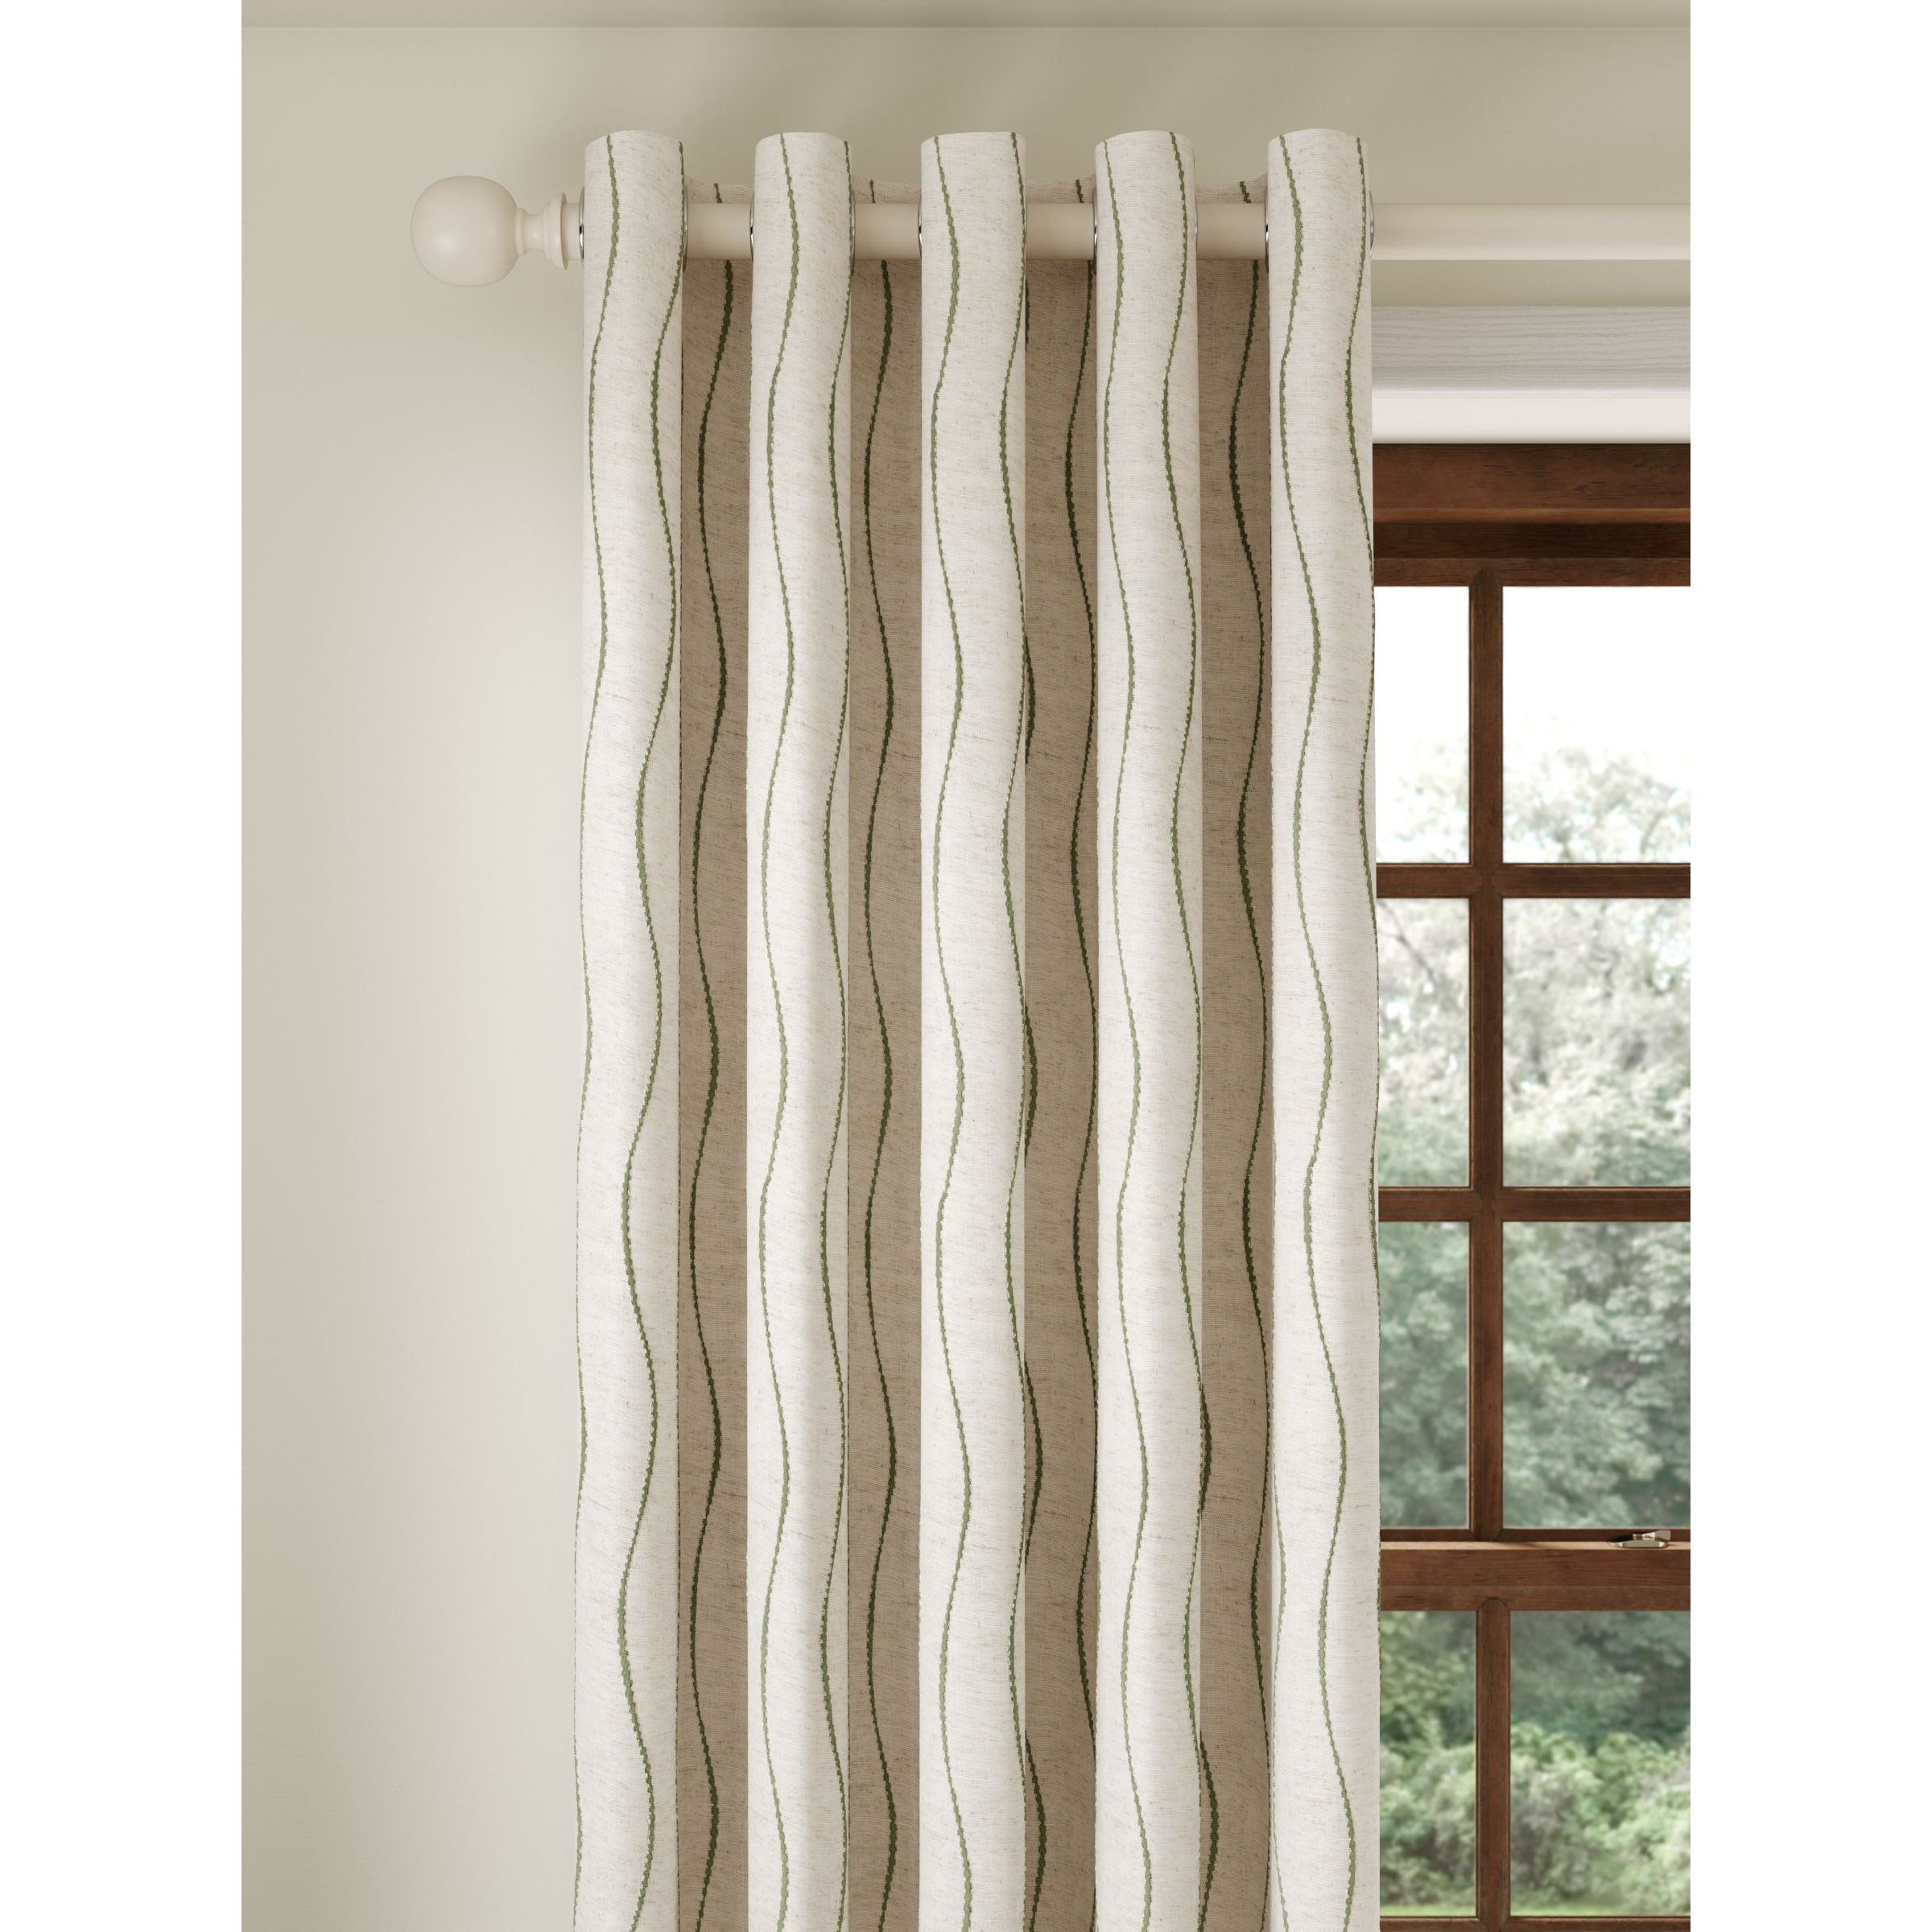 John Lewis Picot Stripe Embroidery Pair Lined Eyelet Curtains - image 1